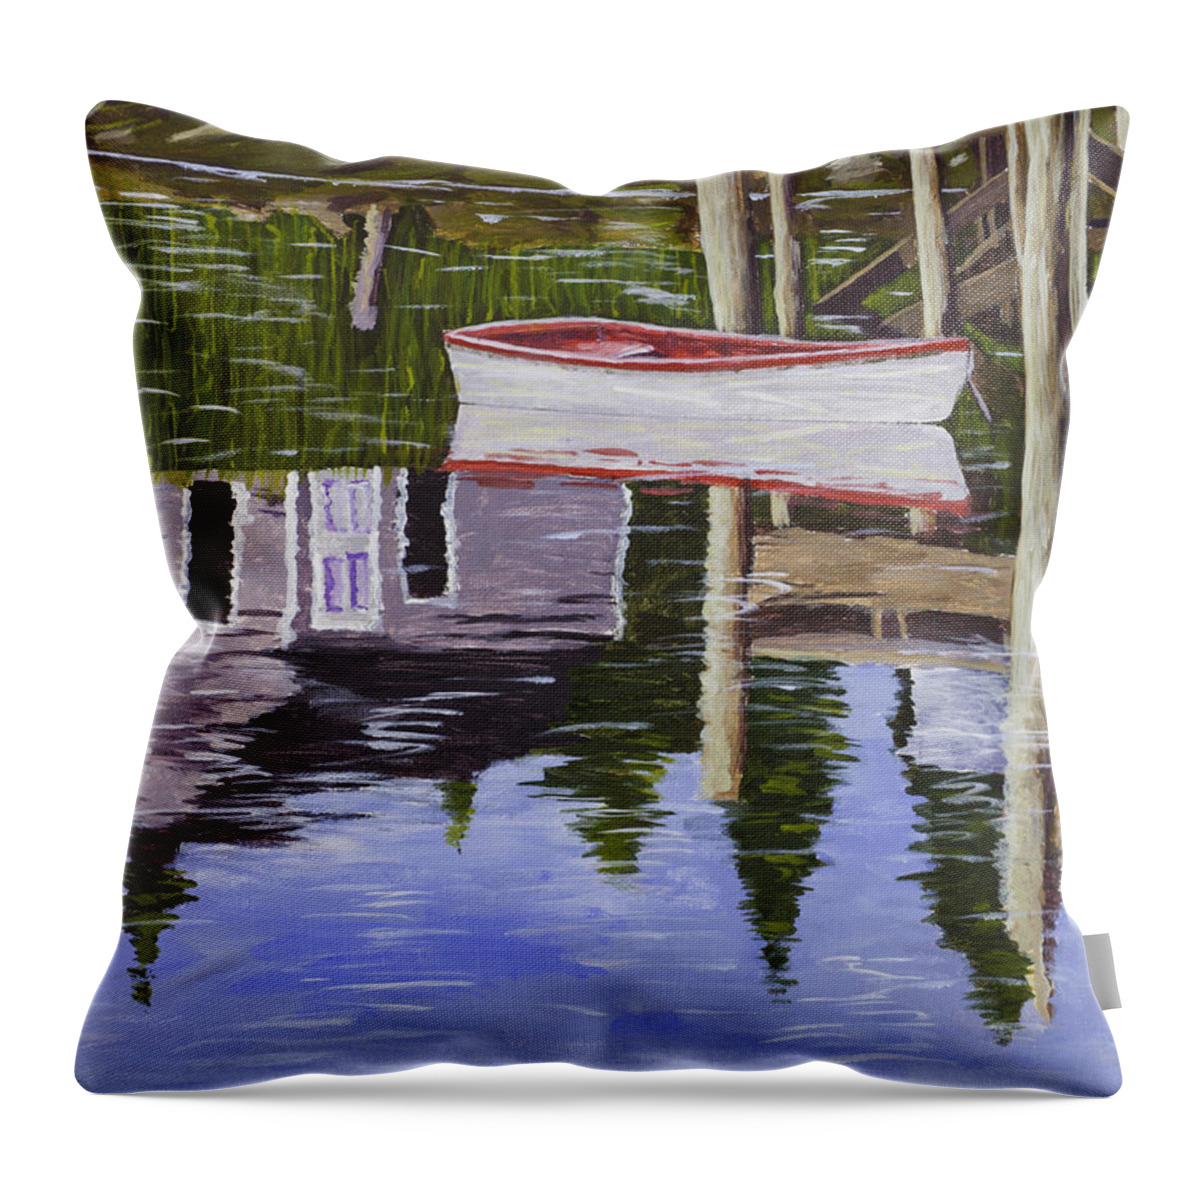 Small Throw Pillow featuring the painting Small Boat And Water Reflections in Maine by Keith Webber Jr